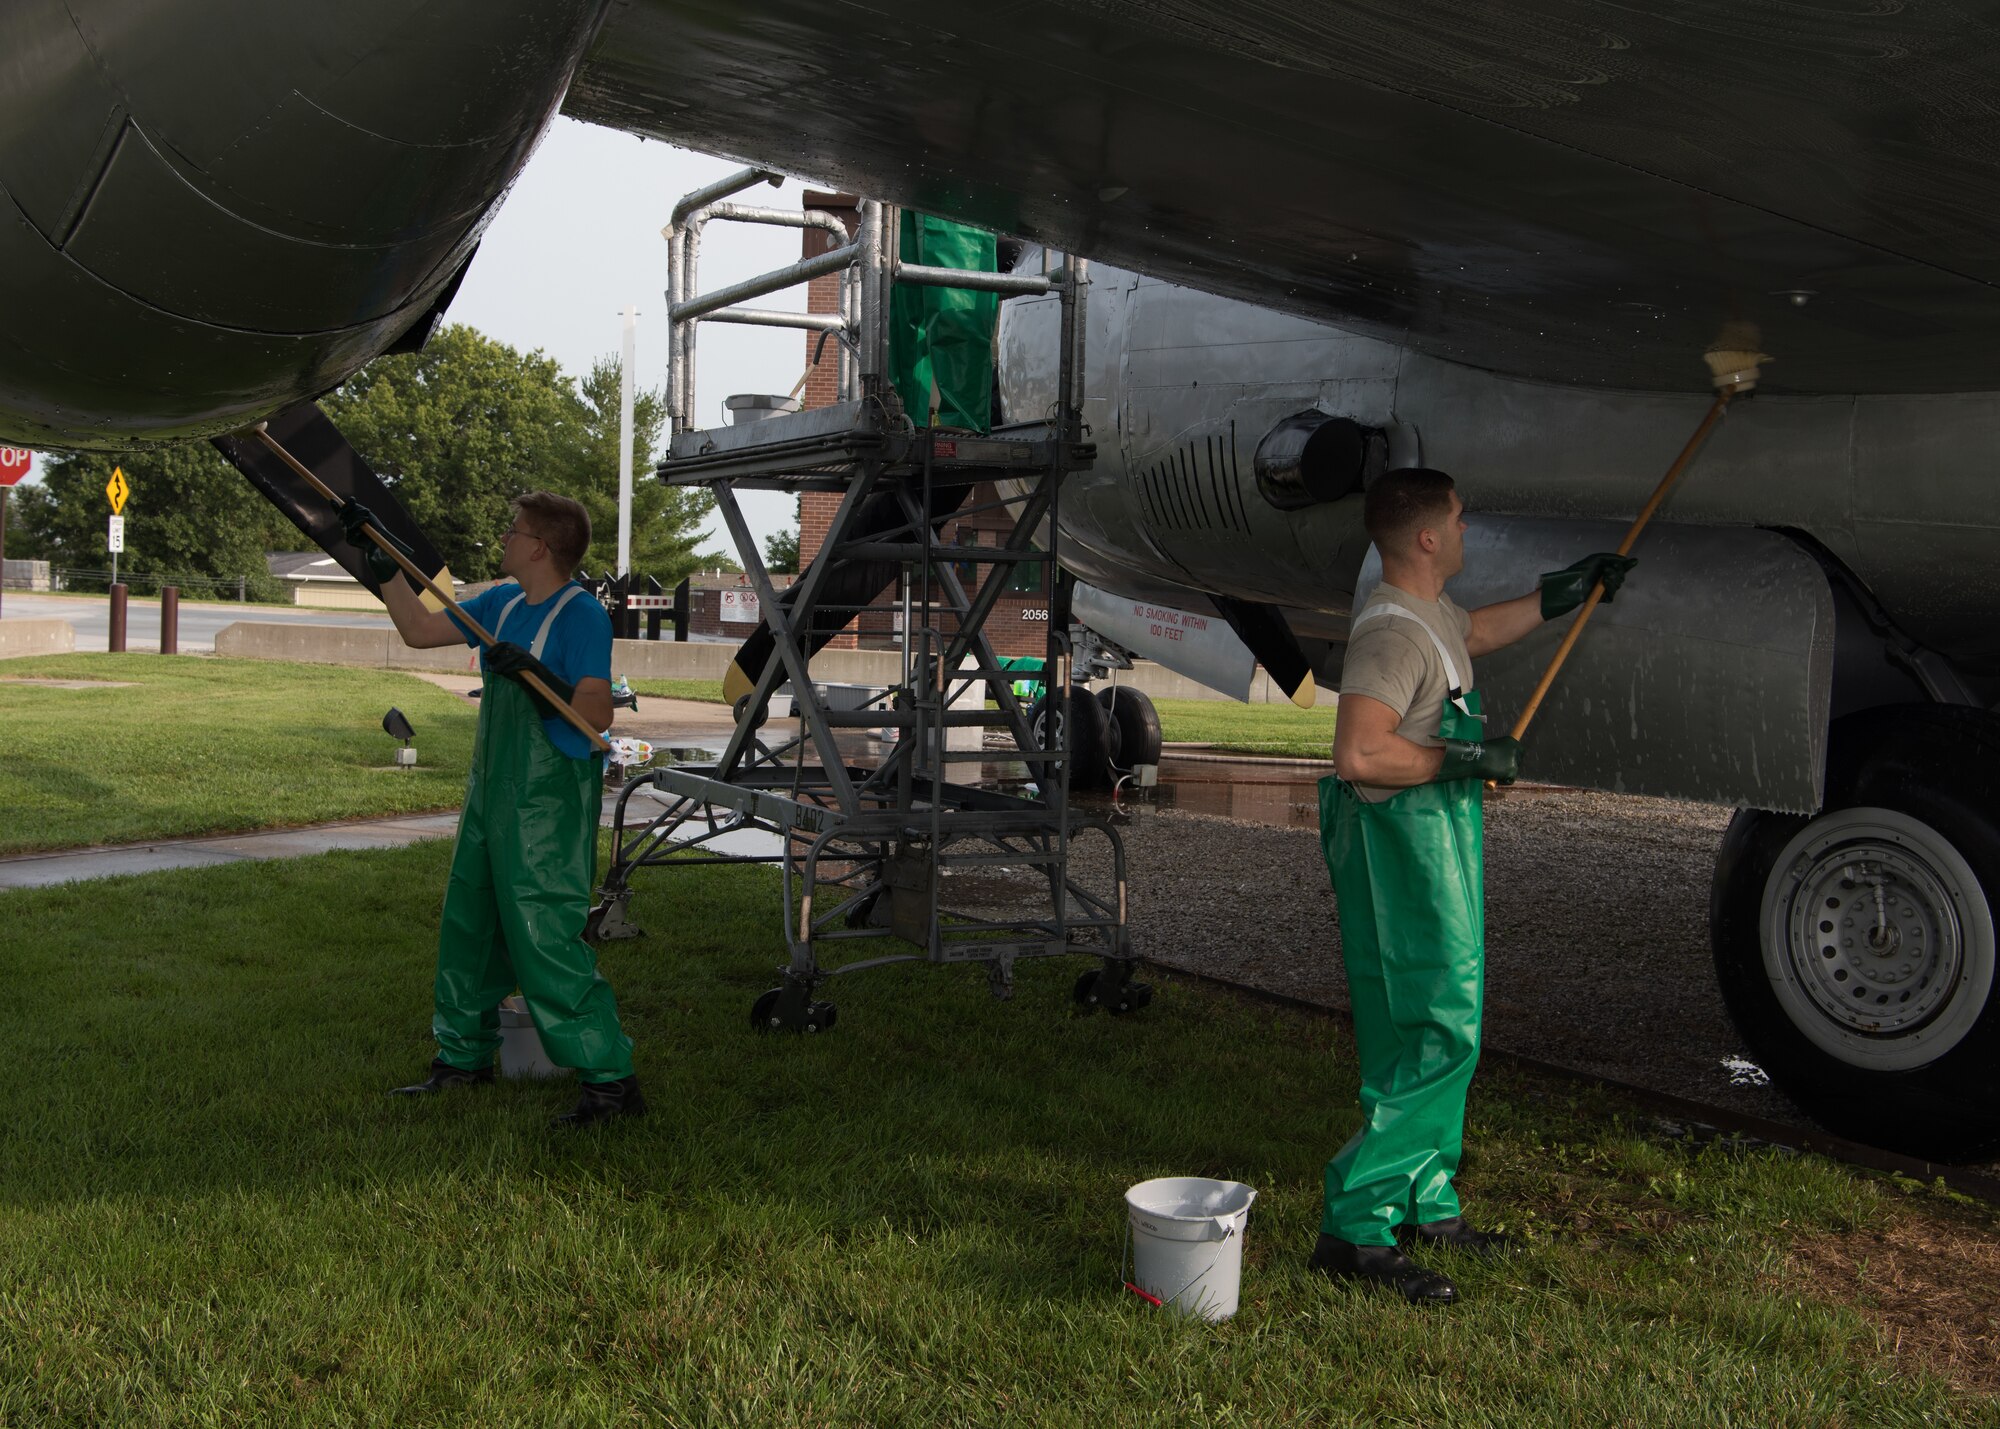 Airmen scrub the underside of the left wing of a B-29 Superfortress.